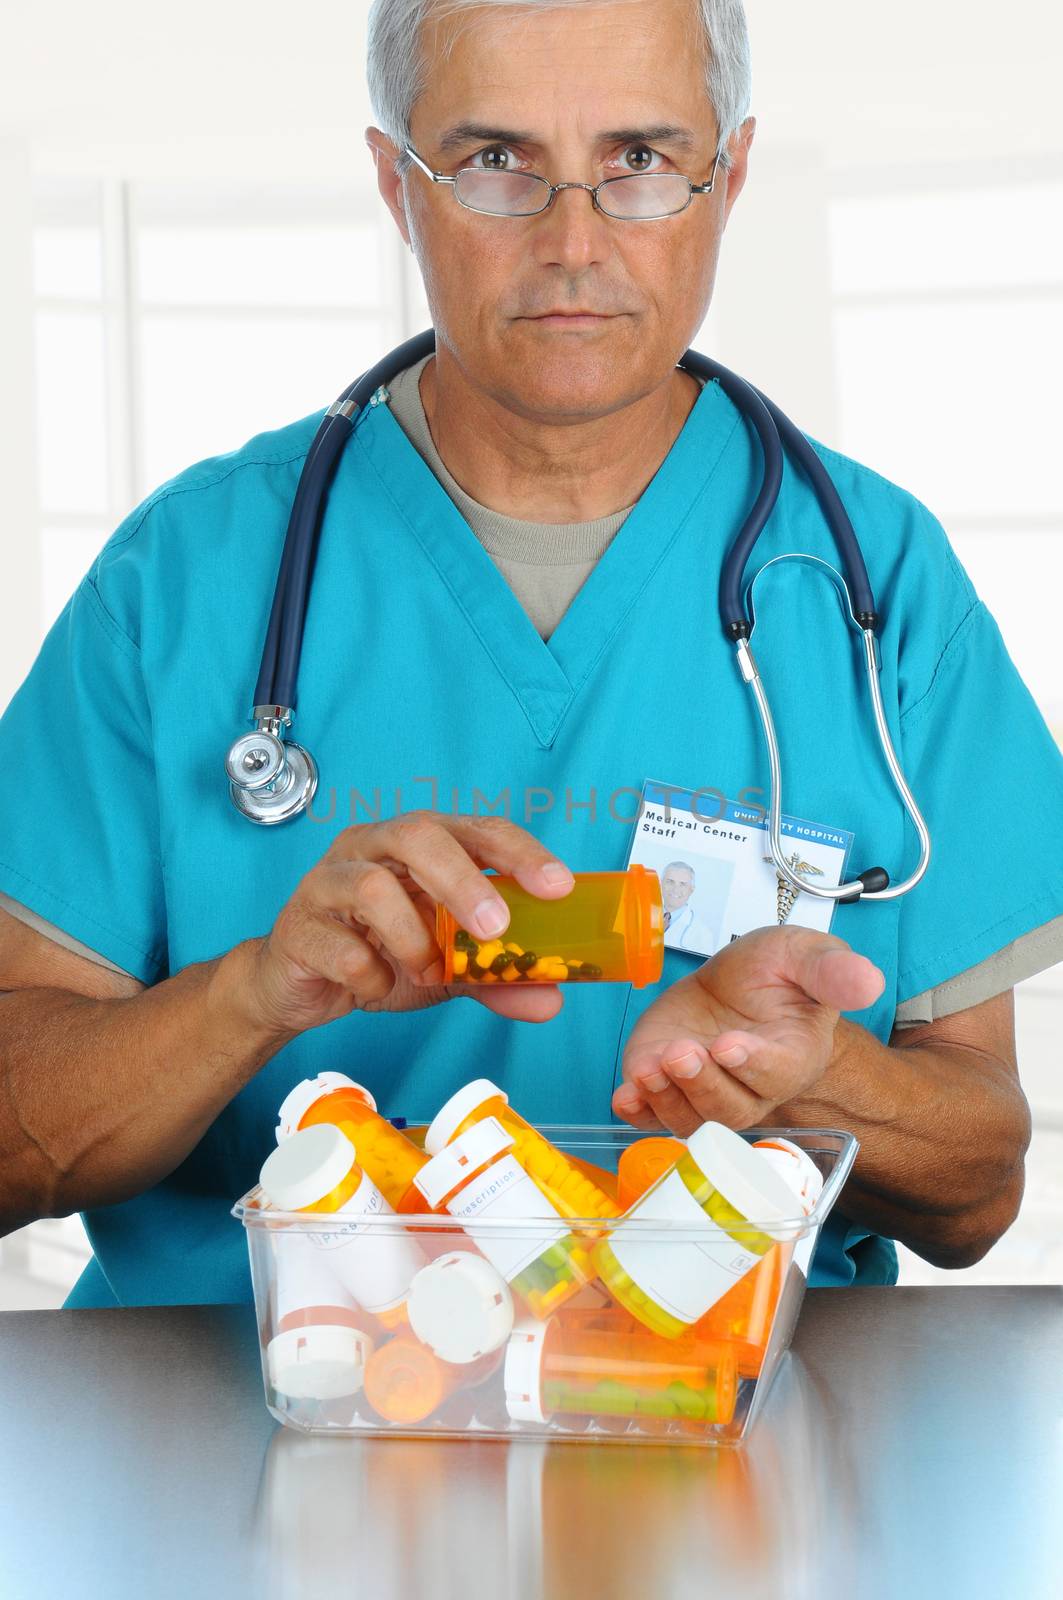 Smiling middle aged doctor pouring prescription medicine from a bottle into his hand. Vertical format in modern office setting.